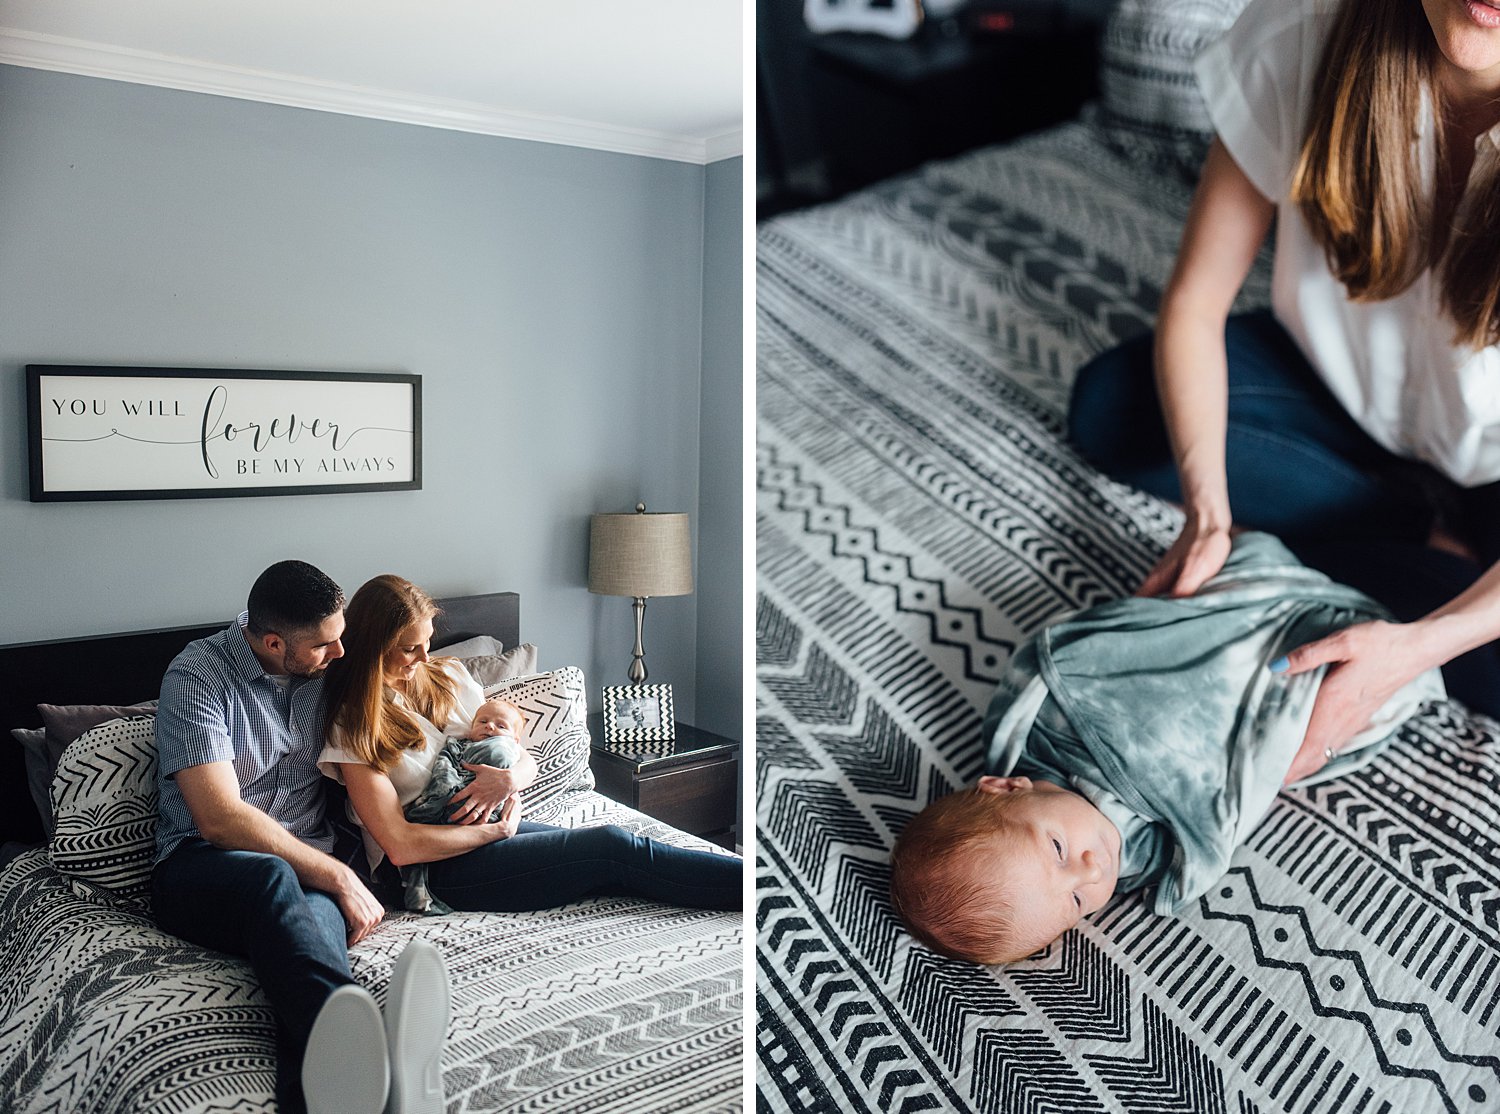 The Youngs - Paoli Newborn Session - Rockville Newborn and Family Photographer - Alison Dunn Photography